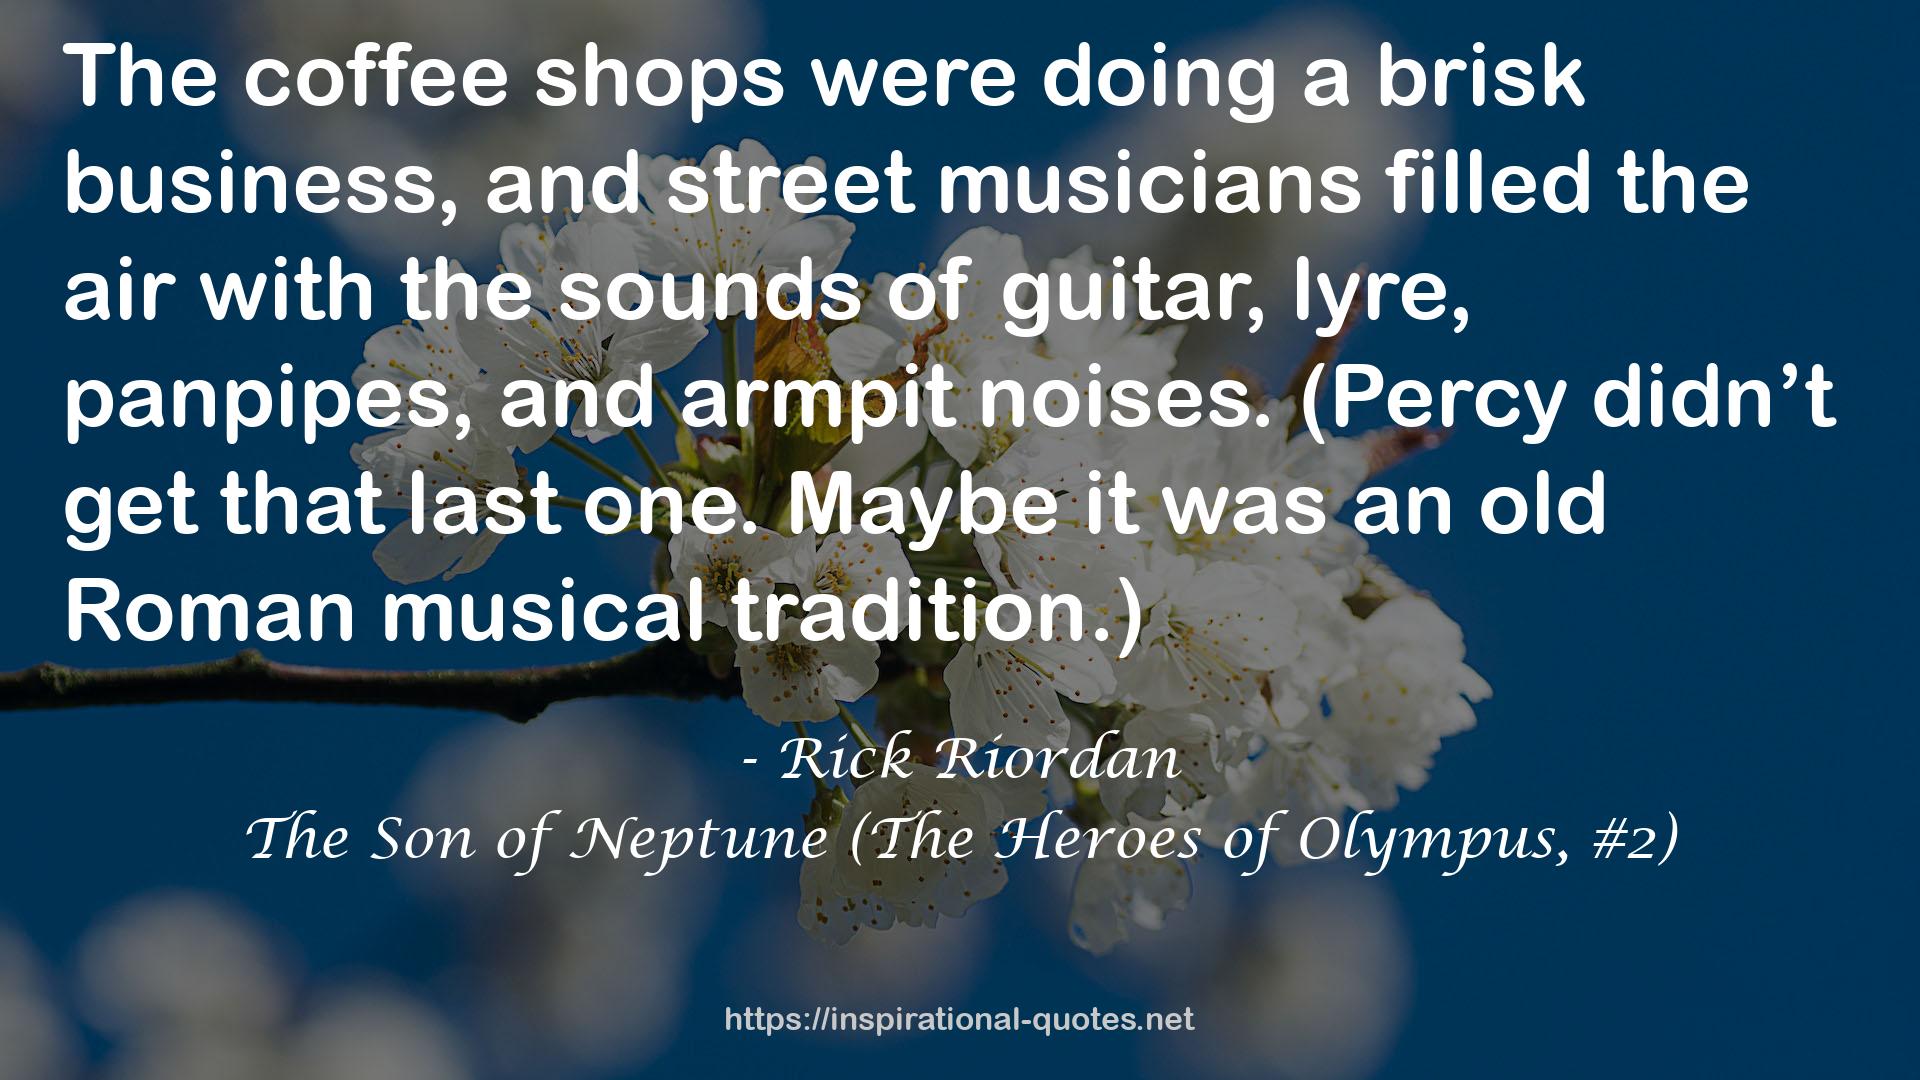 The Son of Neptune (The Heroes of Olympus, #2) QUOTES